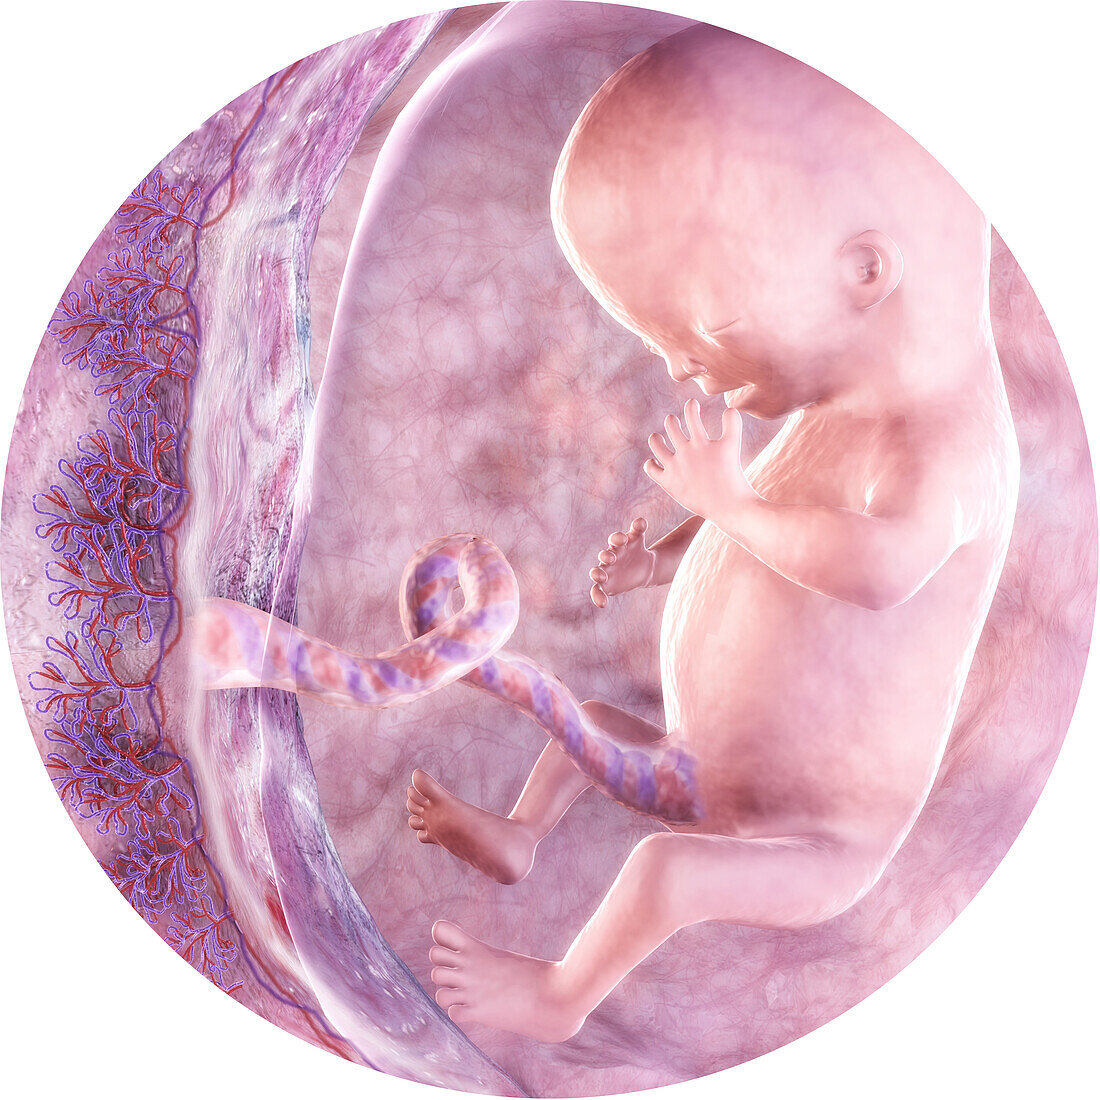 Embryo in the womb at 12 weeks, illustration